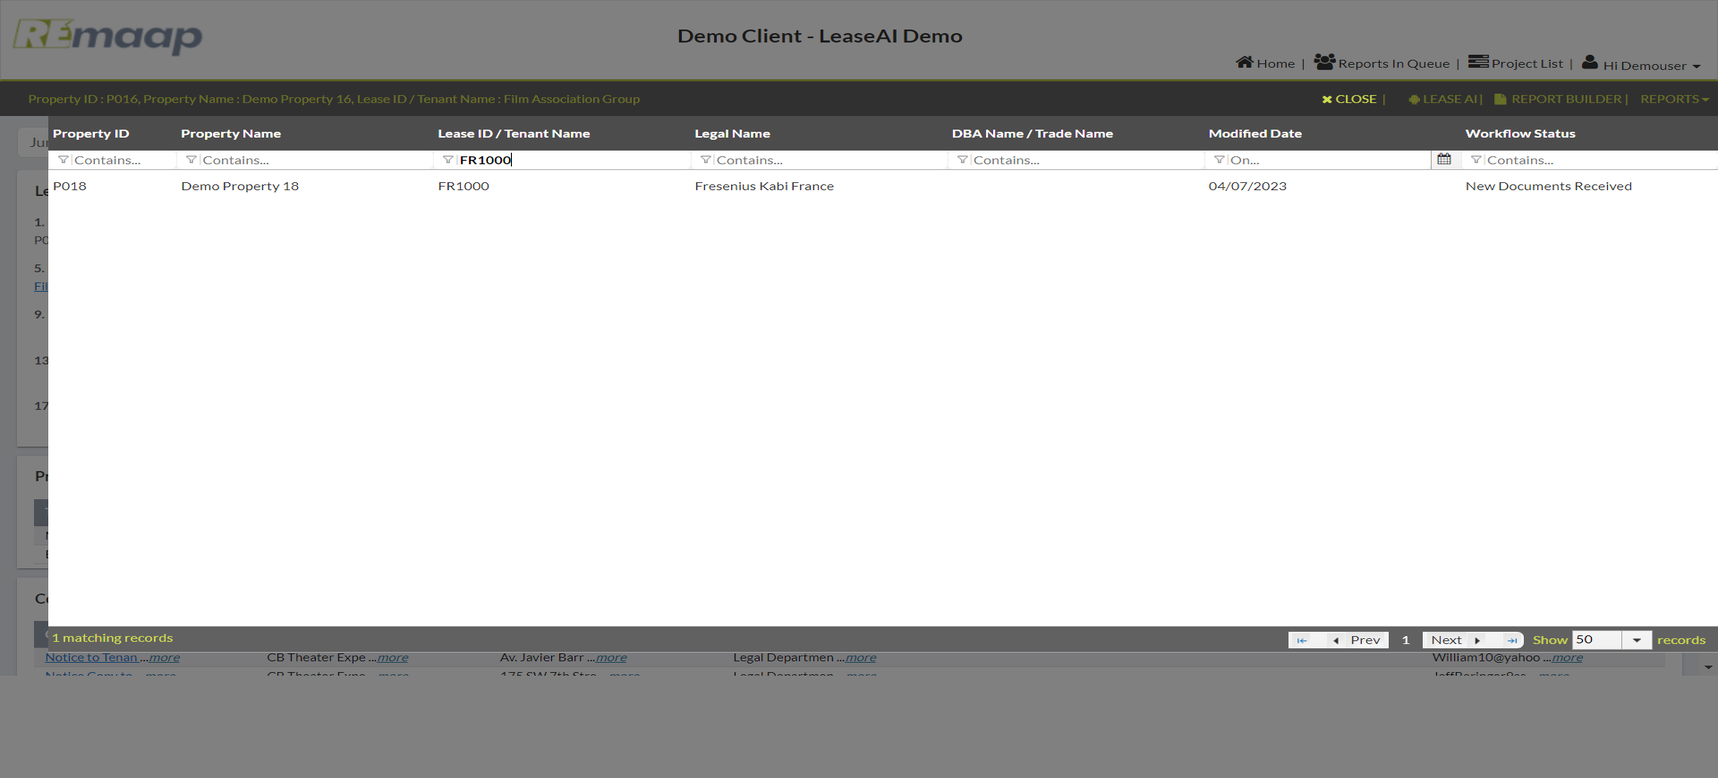 REAP - Lease summary screen5 - view attached documents